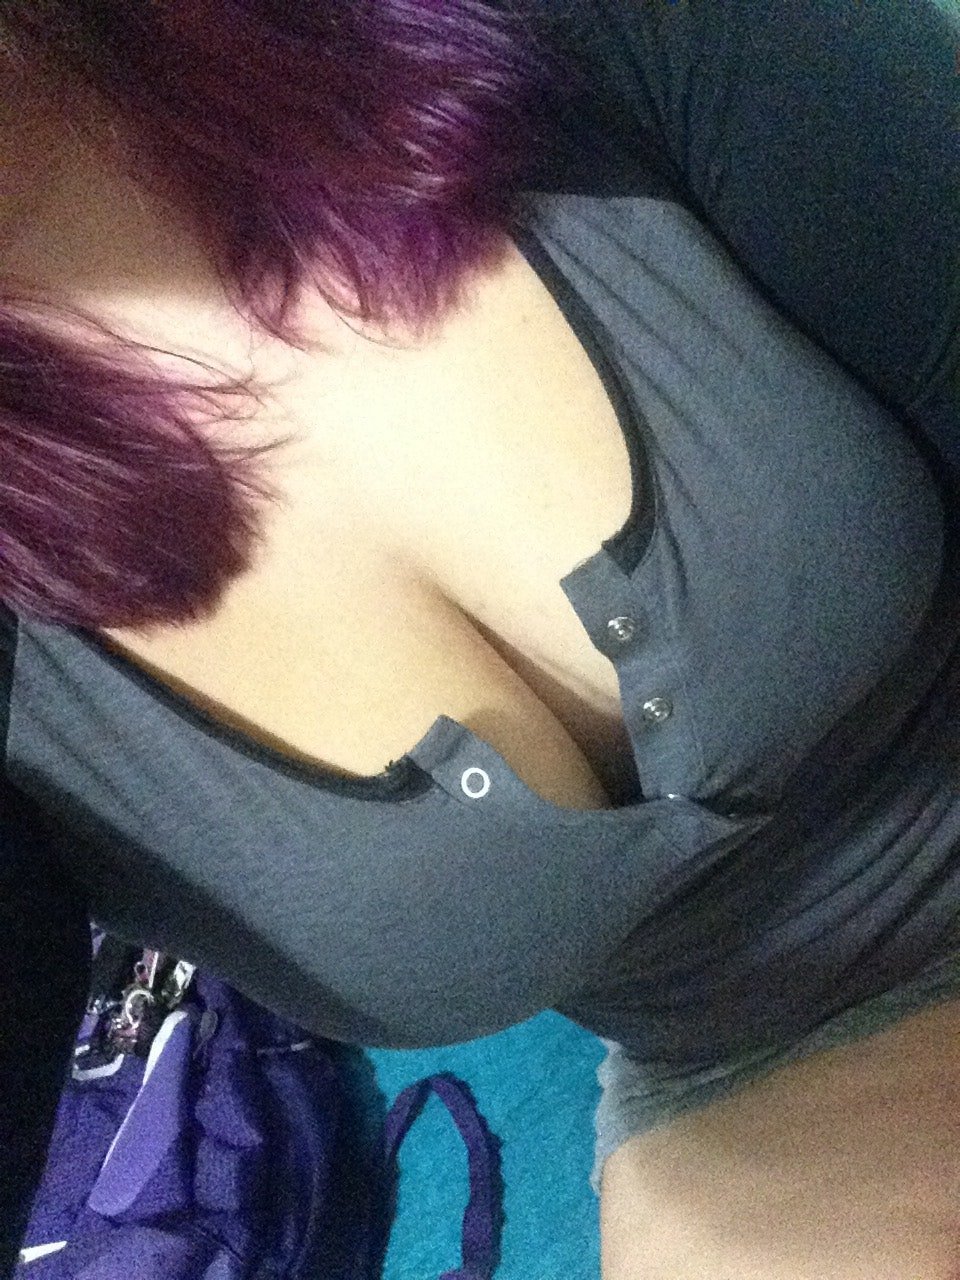 Showing off my new hair [f]